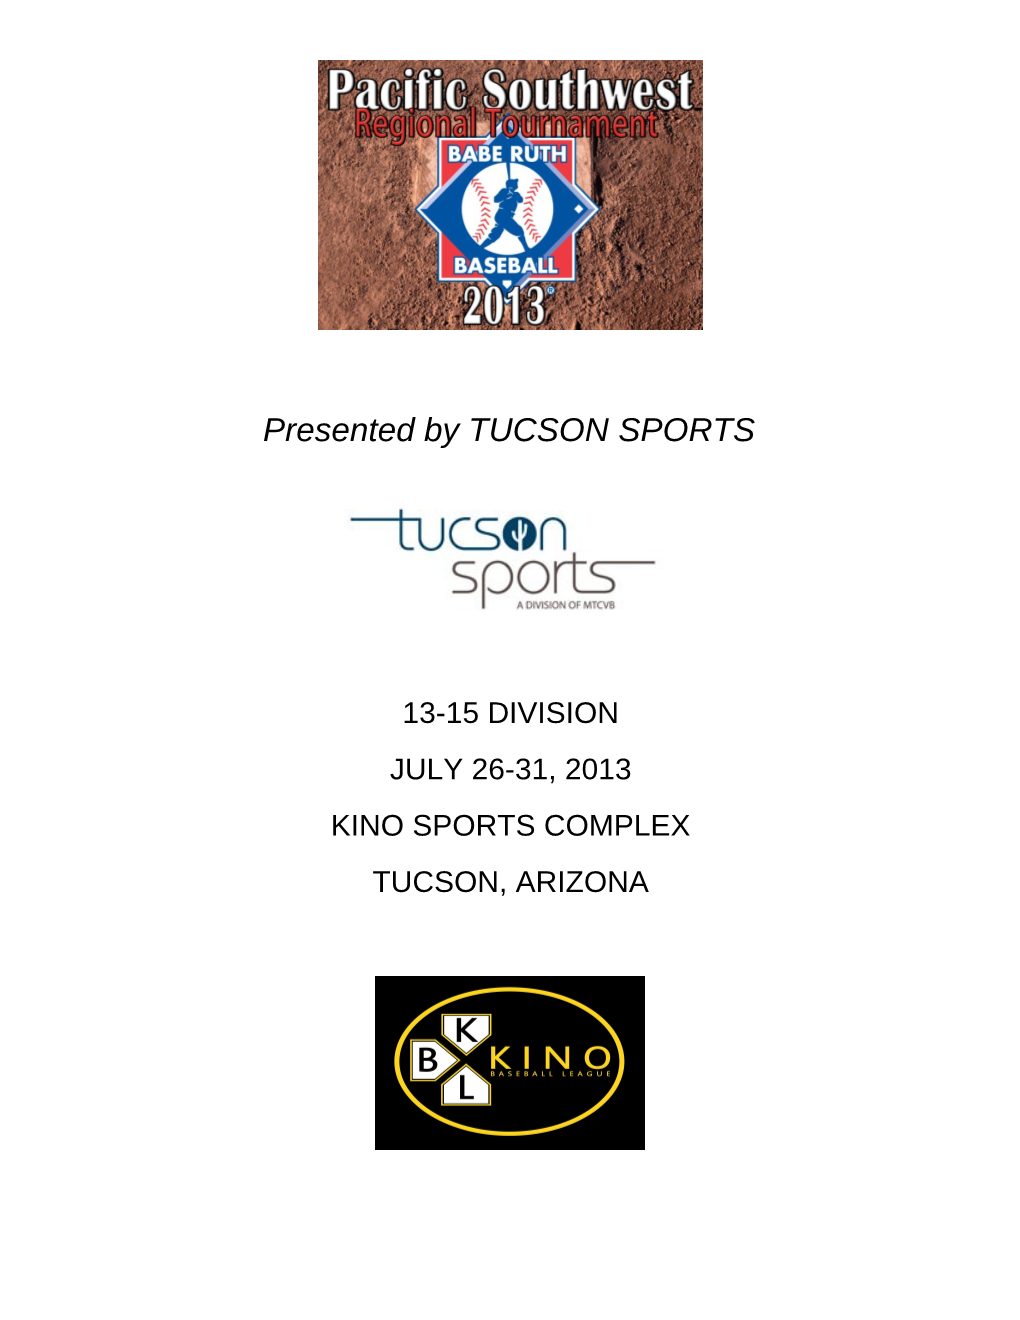 Presented by TUCSON SPORTS